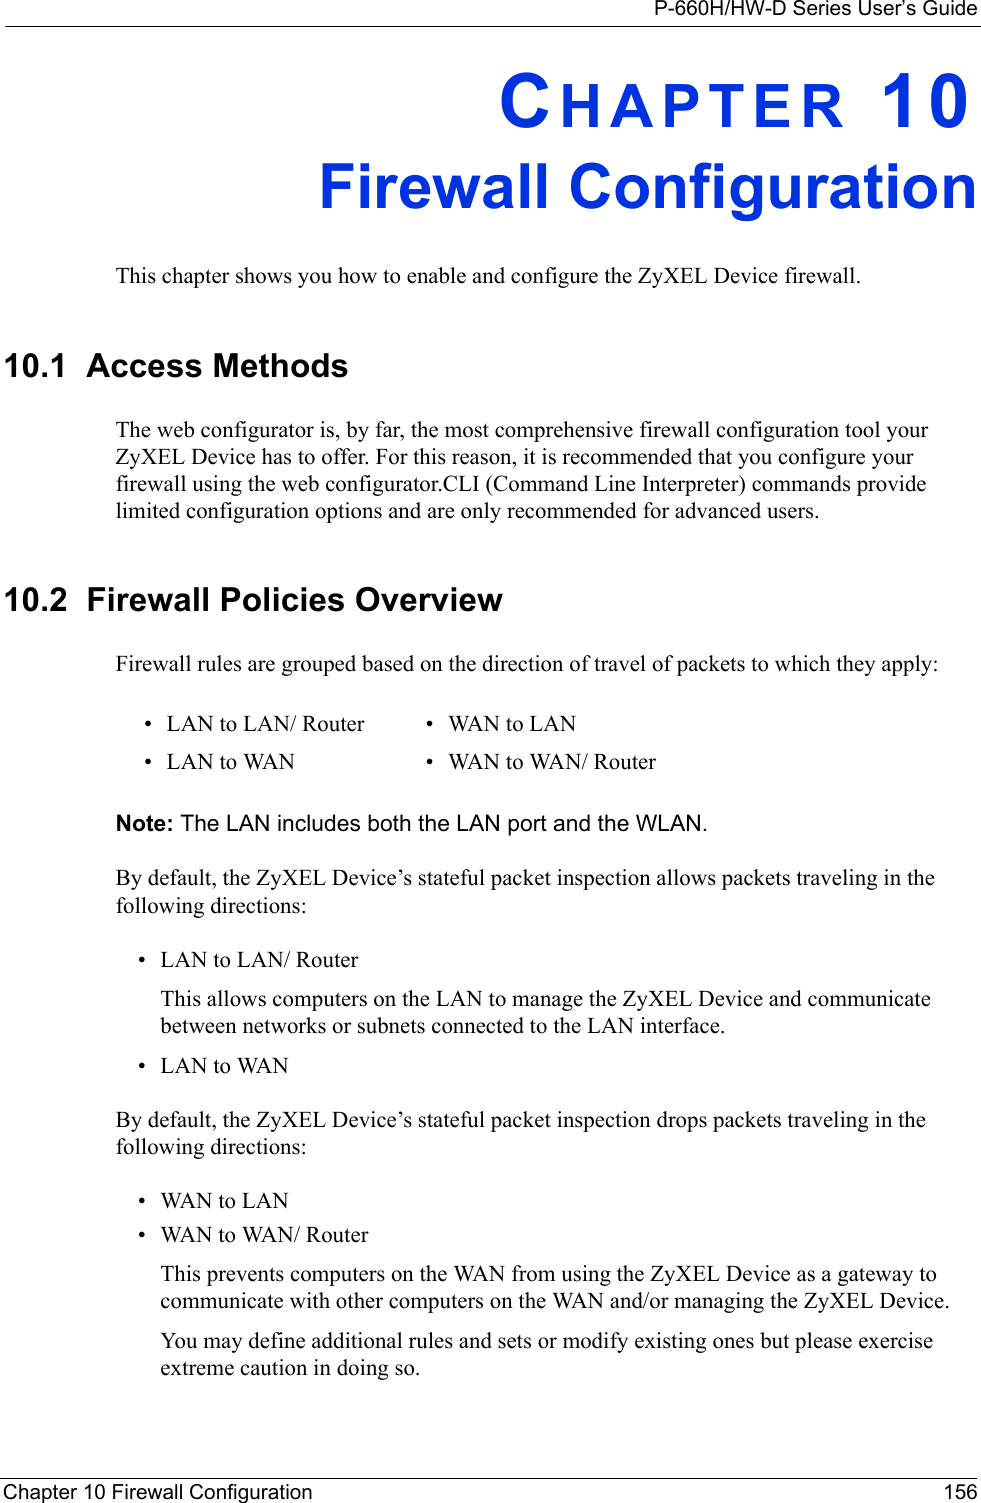 P-660H/HW-D Series User’s GuideChapter 10 Firewall Configuration 156CHAPTER 10Firewall ConfigurationThis chapter shows you how to enable and configure the ZyXEL Device firewall.10.1  Access MethodsThe web configurator is, by far, the most comprehensive firewall configuration tool your ZyXEL Device has to offer. For this reason, it is recommended that you configure your firewall using the web configurator.CLI (Command Line Interpreter) commands provide limited configuration options and are only recommended for advanced users.10.2  Firewall Policies Overview  Firewall rules are grouped based on the direction of travel of packets to which they apply: Note: The LAN includes both the LAN port and the WLAN.By default, the ZyXEL Device’s stateful packet inspection allows packets traveling in the following directions:• LAN to LAN/ Router This allows computers on the LAN to manage the ZyXEL Device and communicate between networks or subnets connected to the LAN interface.• LAN to WANBy default, the ZyXEL Device’s stateful packet inspection drops packets traveling in the following directions:•WAN to LAN•WAN to WAN/ Router This prevents computers on the WAN from using the ZyXEL Device as a gateway to communicate with other computers on the WAN and/or managing the ZyXEL Device.You may define additional rules and sets or modify existing ones but please exercise extreme caution in doing so.• LAN to LAN/ Router • WAN to LAN• LAN to WAN • WAN to WAN/ Router